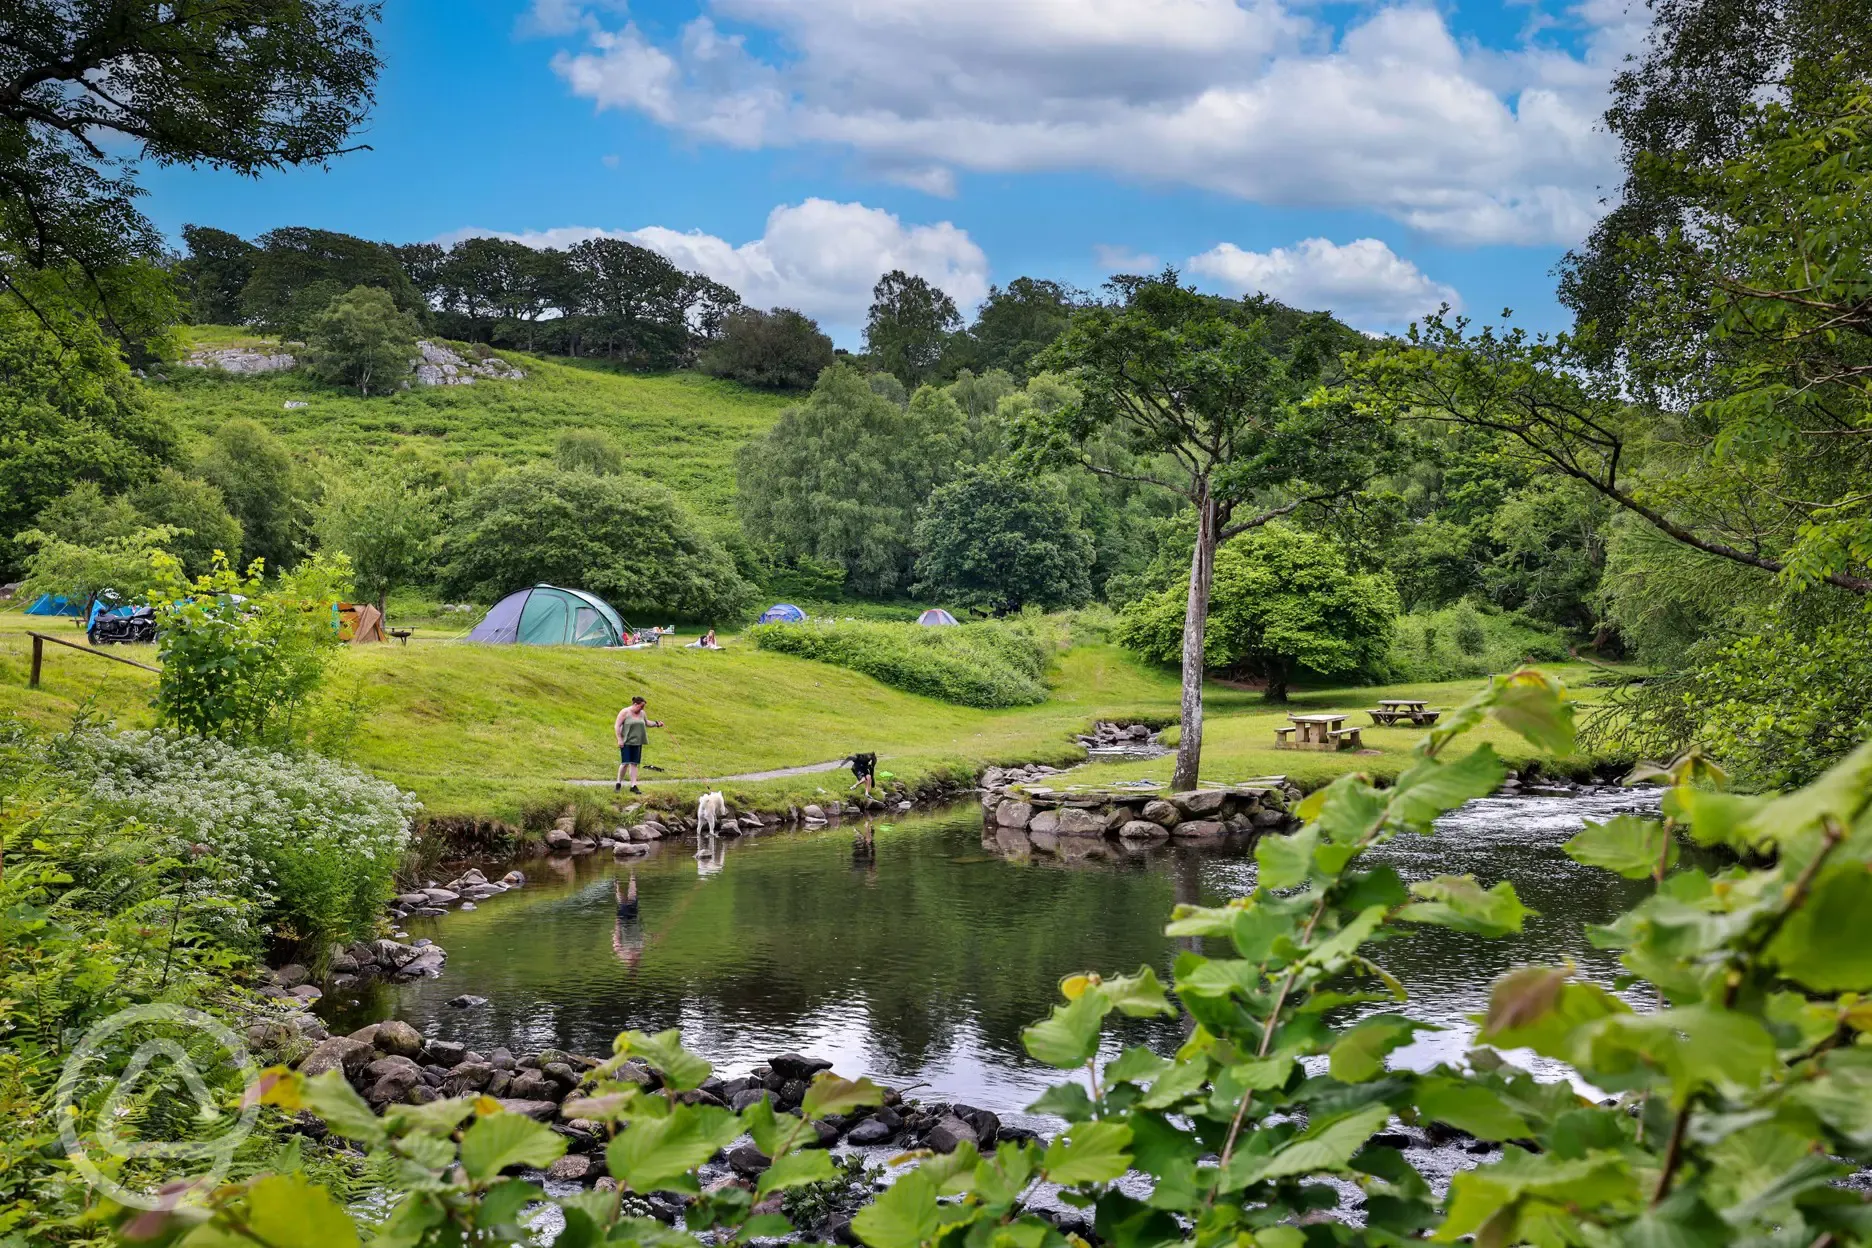 Grass camping pitches by the waterfall